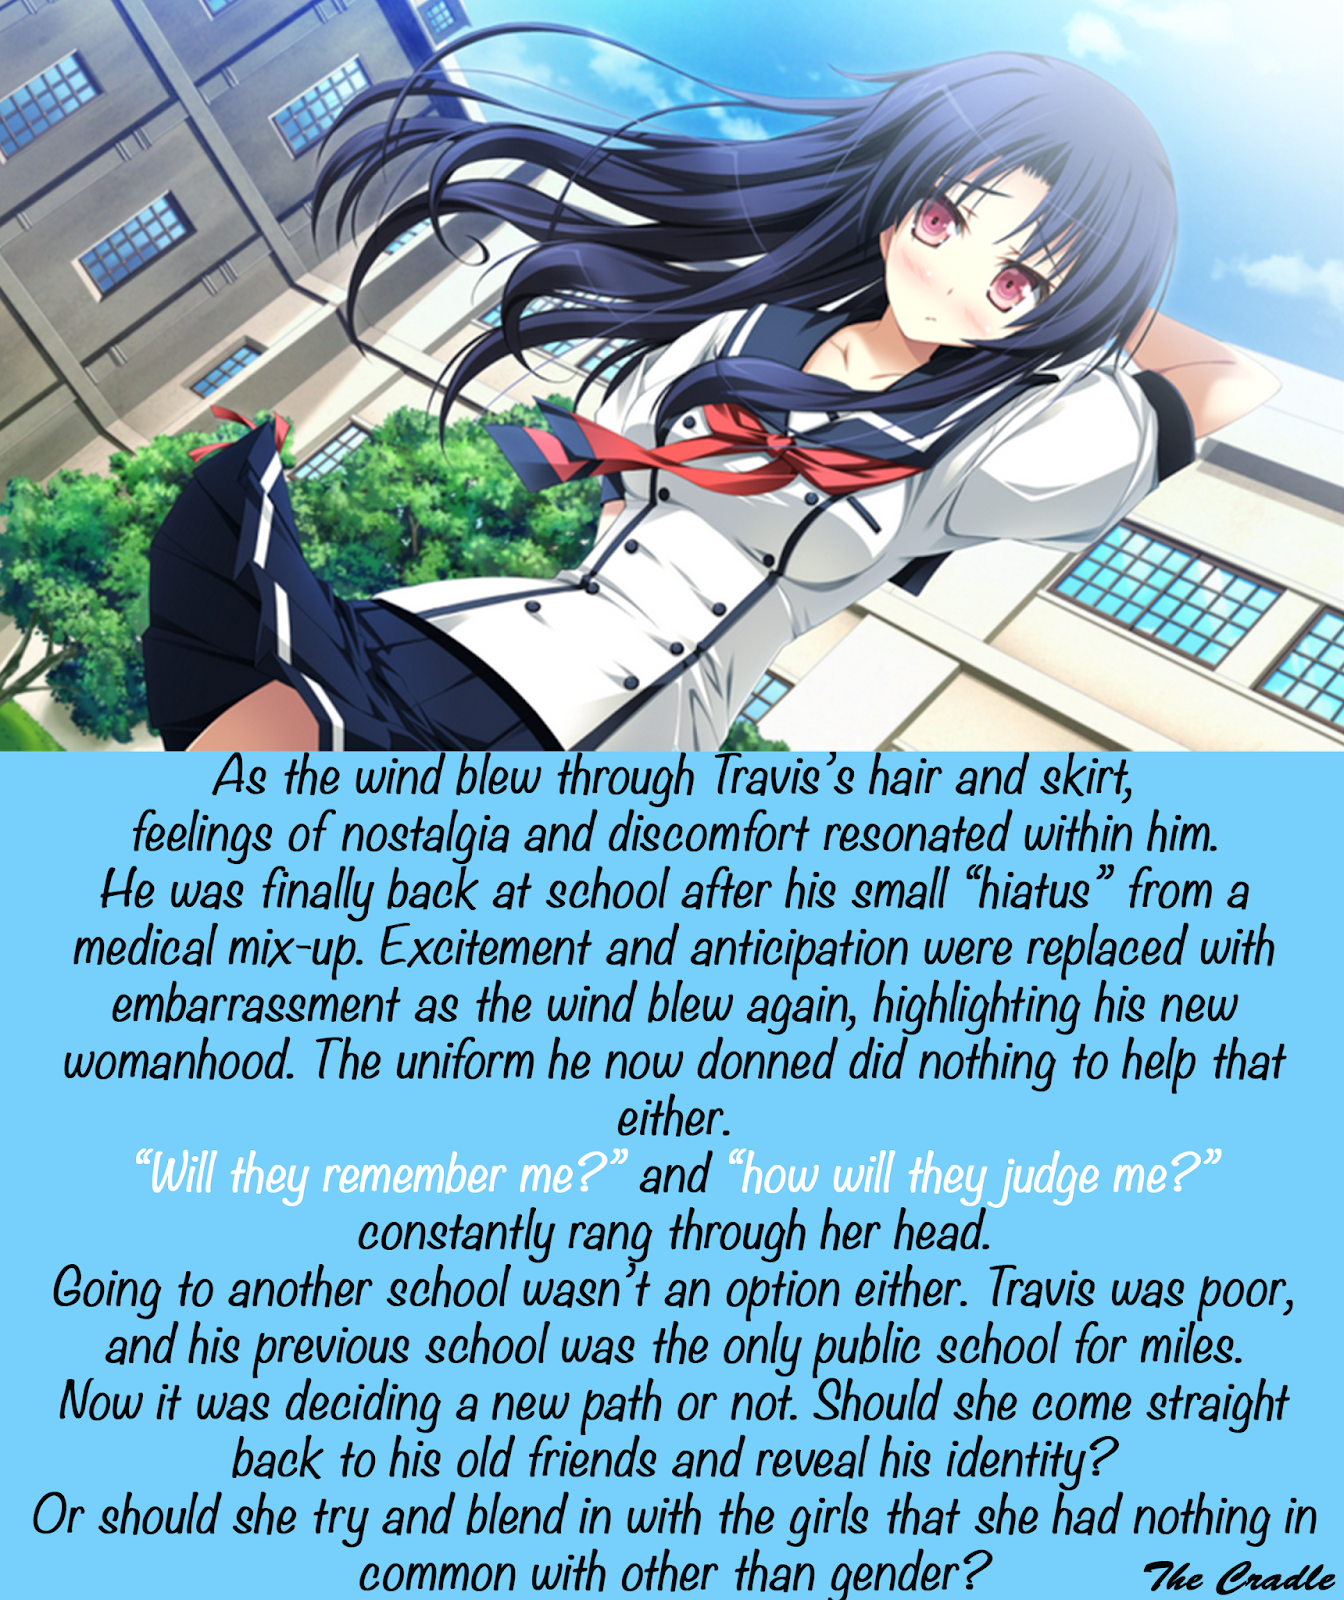 The Cradle S Anime Tg Captions December 2014